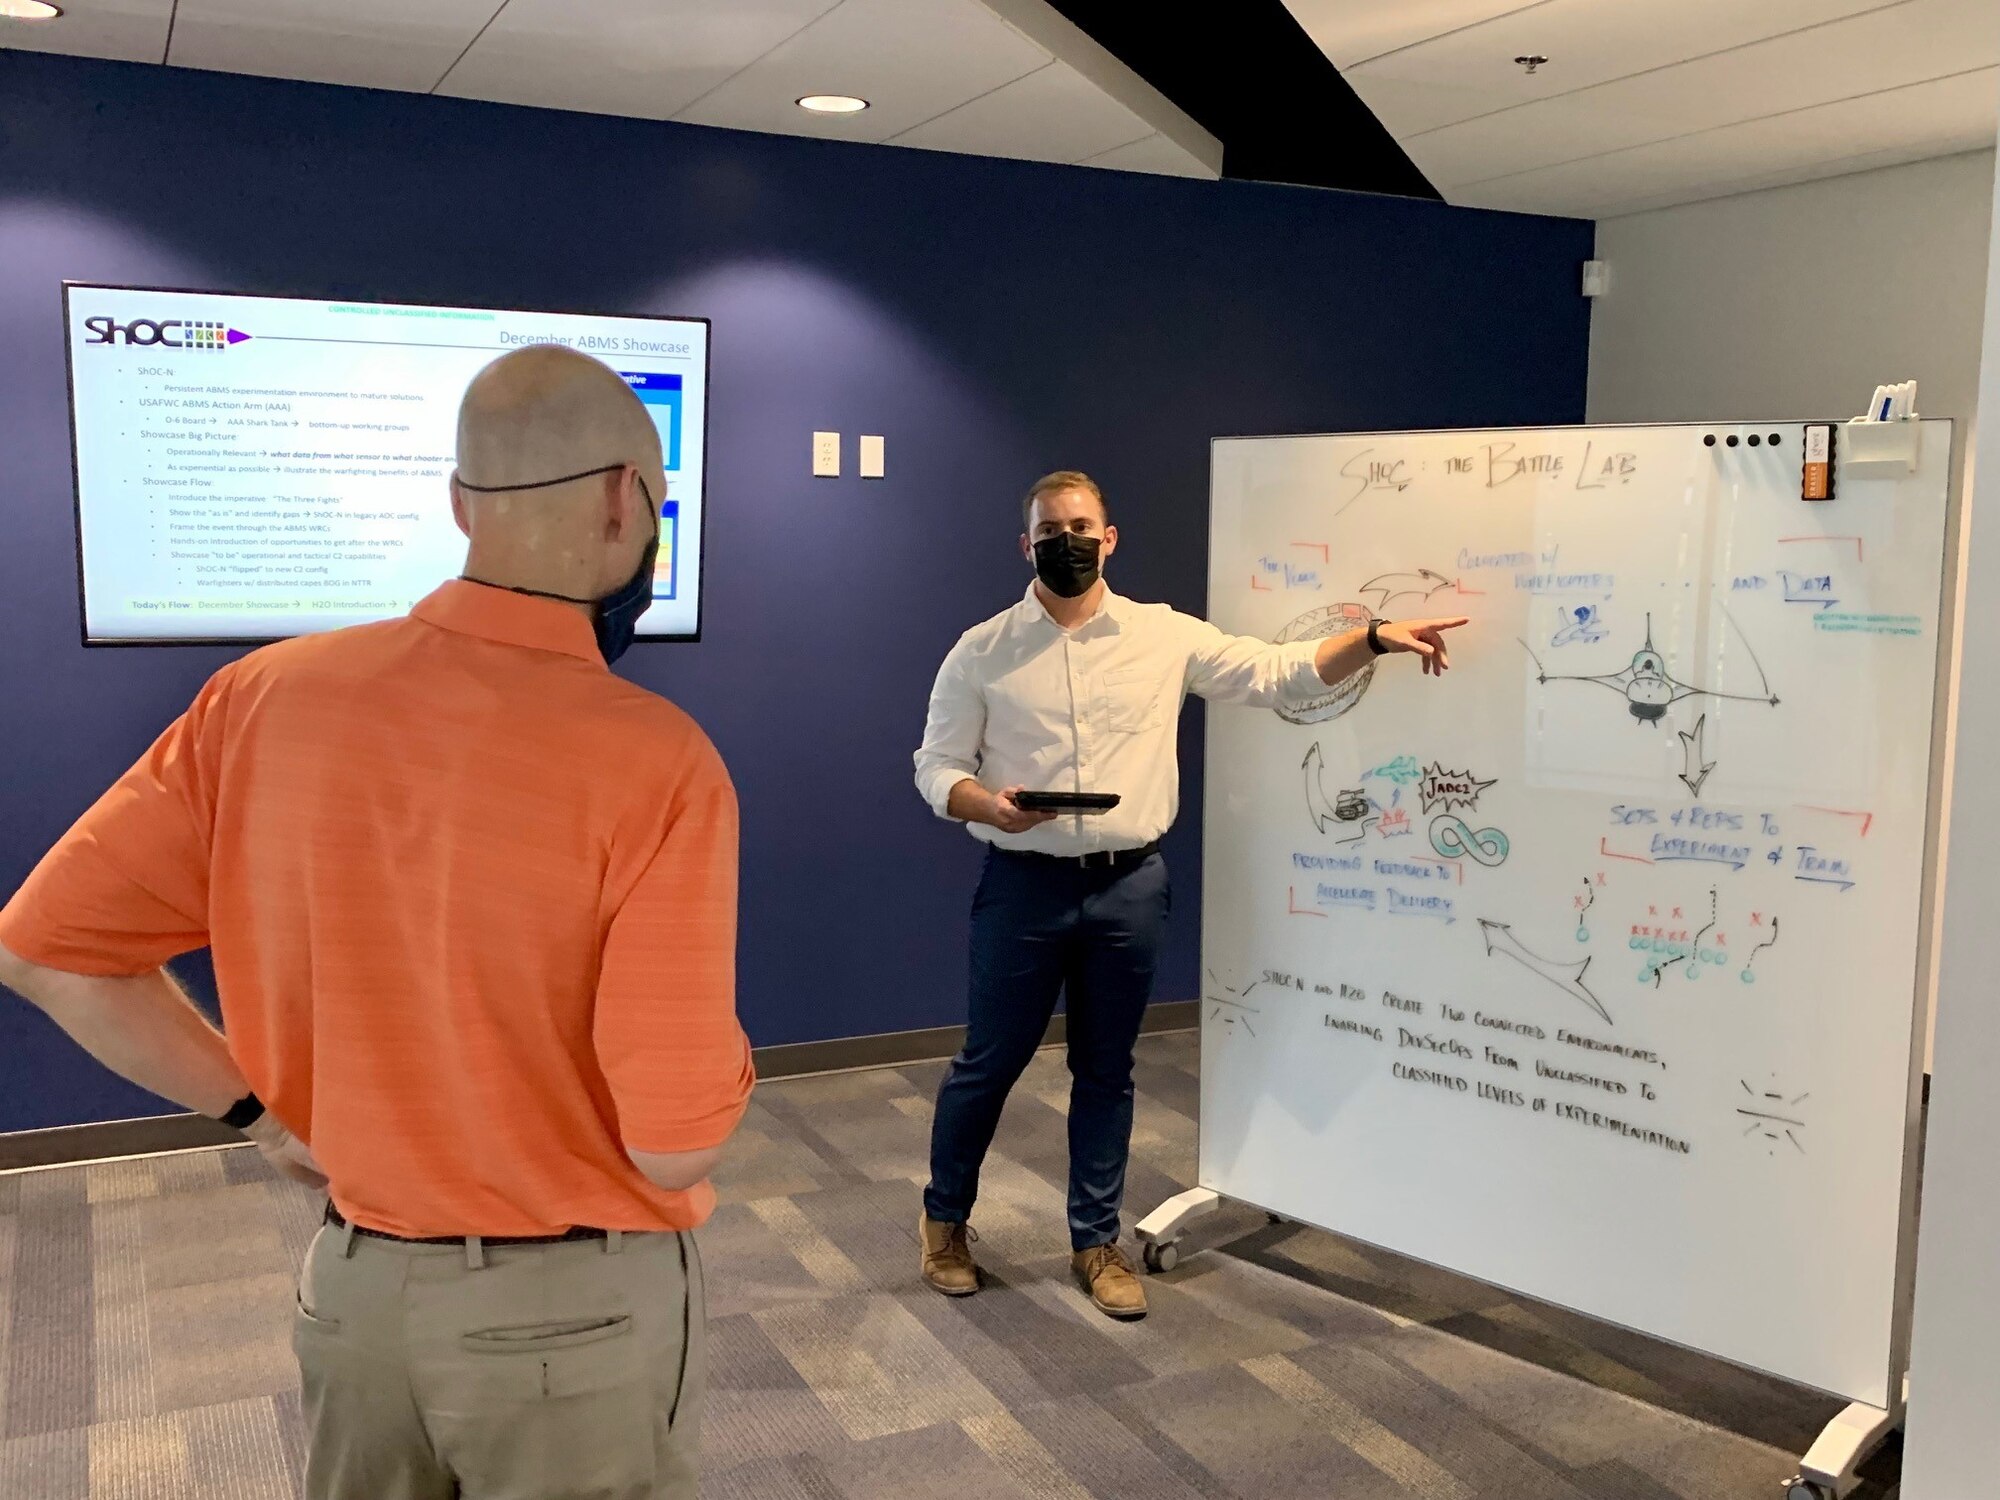 Photo of man briefing another man in front of whiteboard